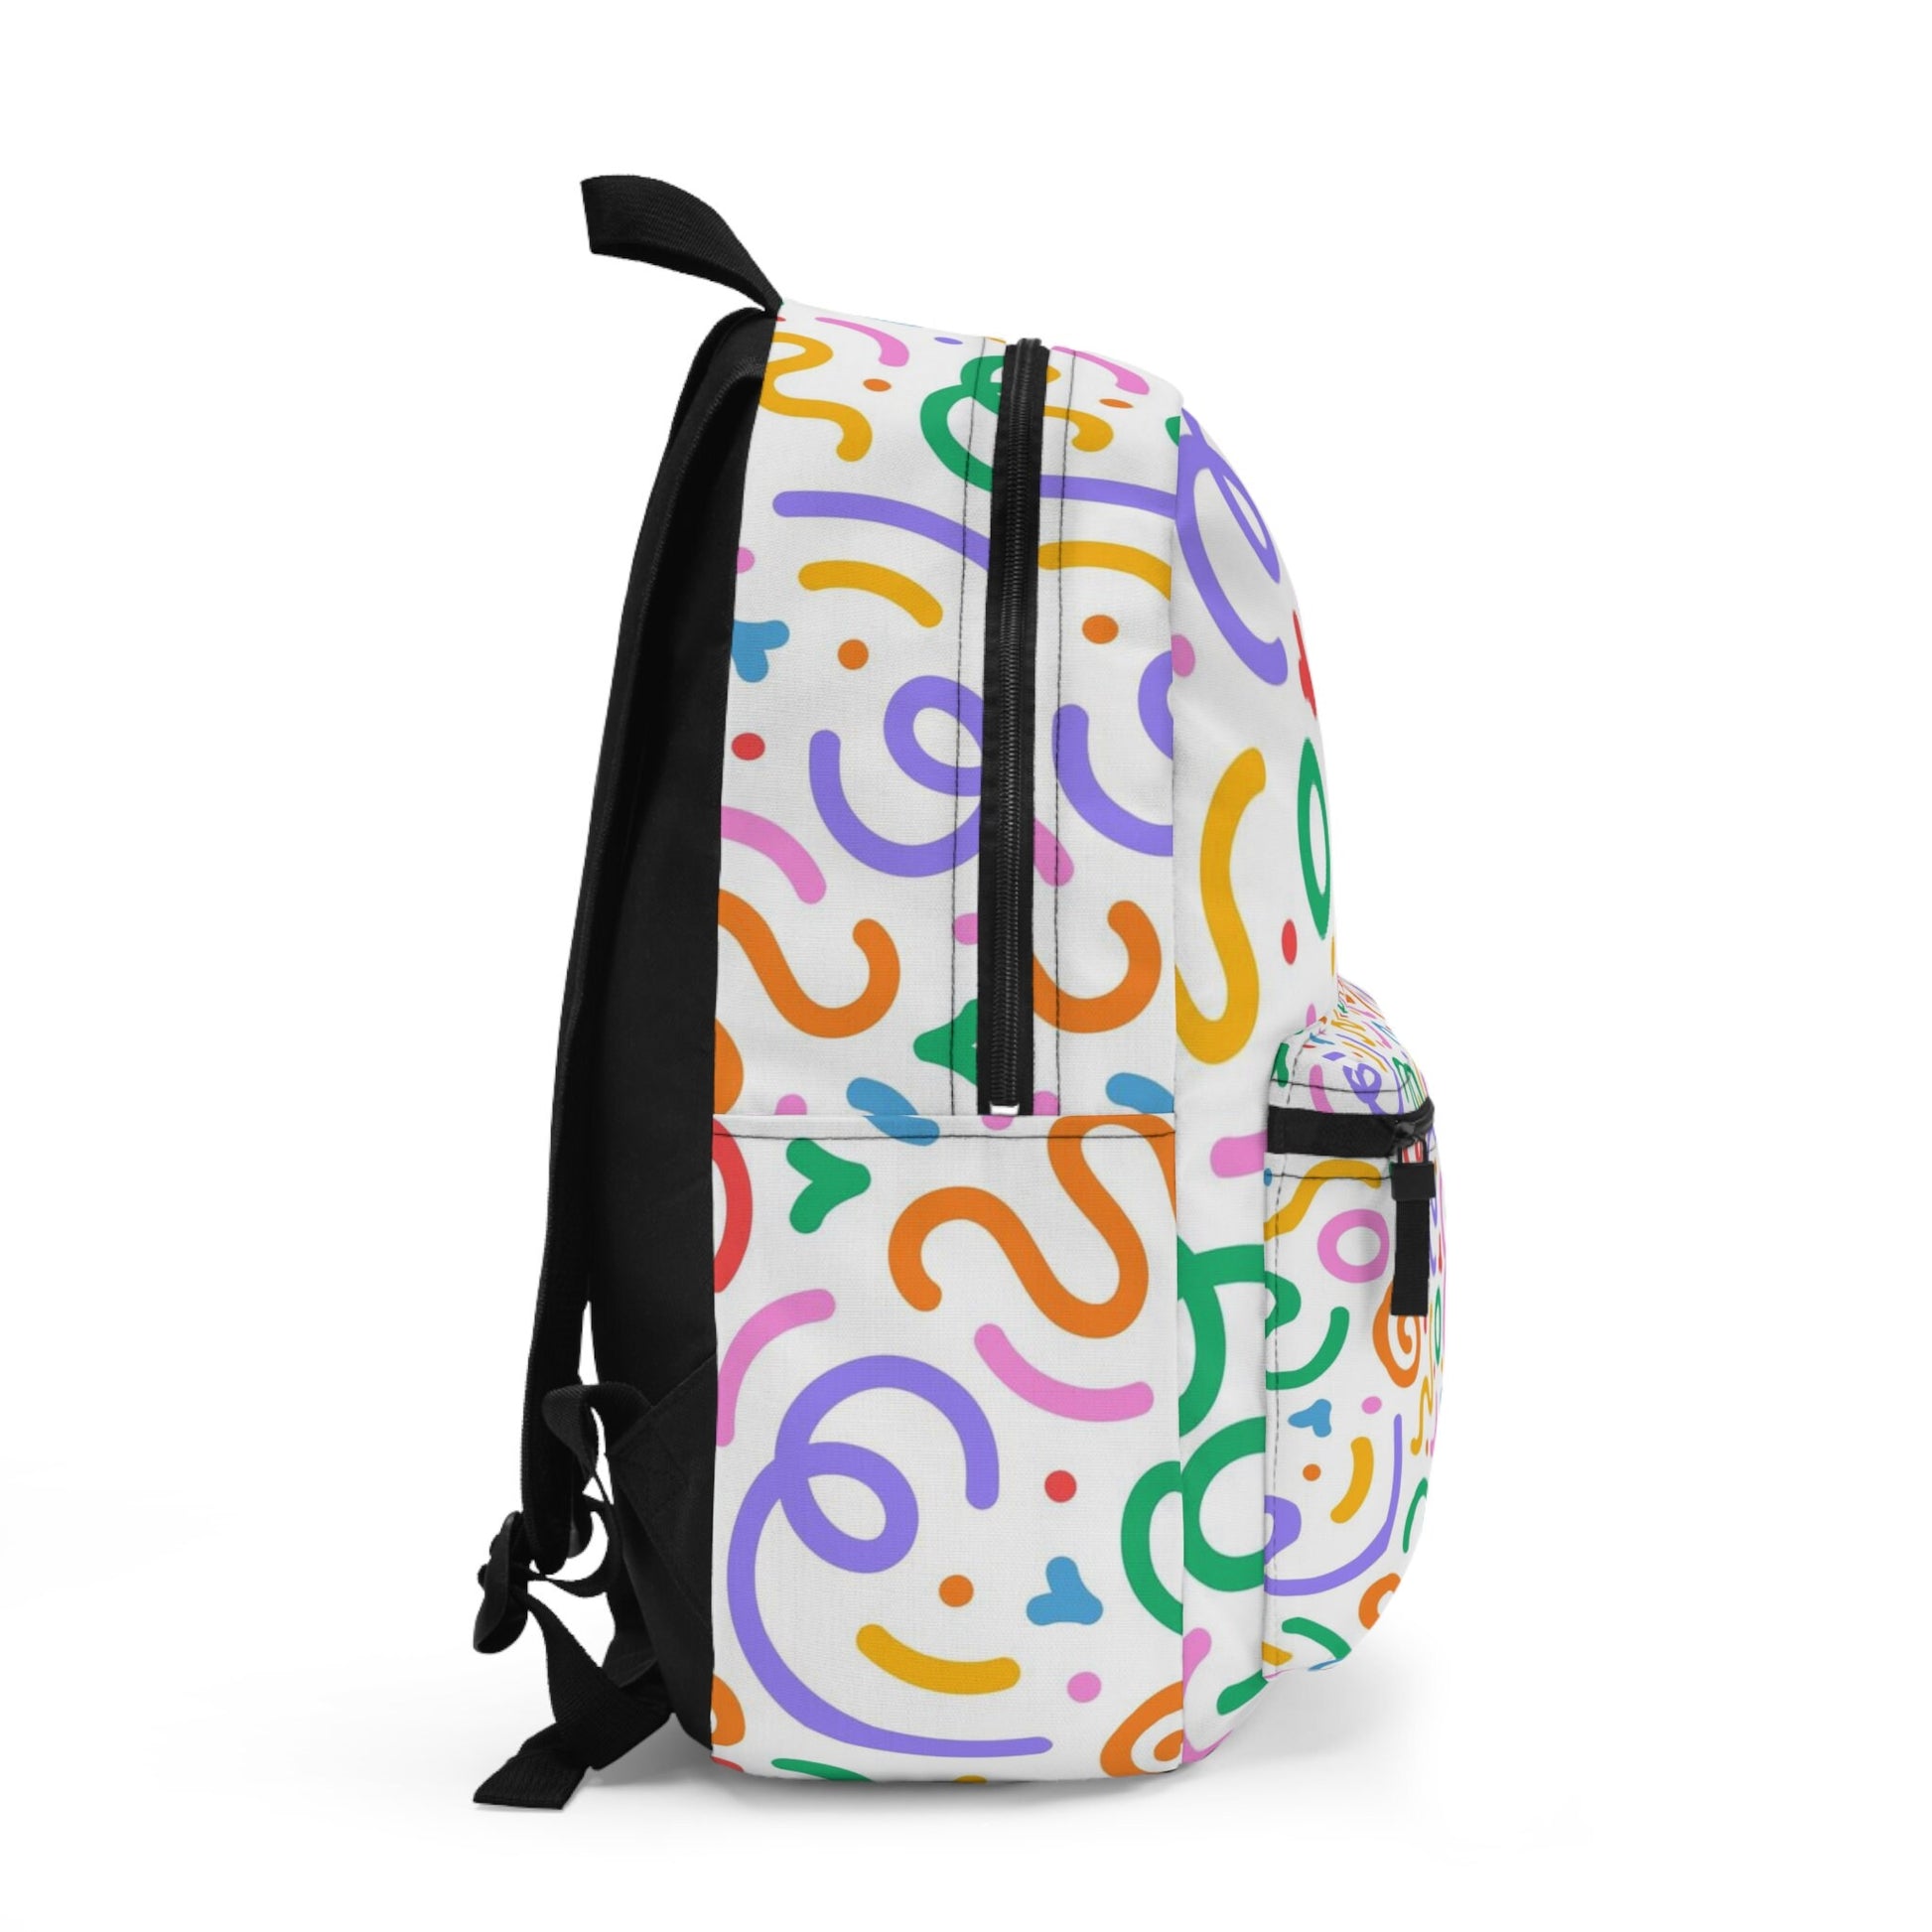 Colorfull Squiggly Backpack